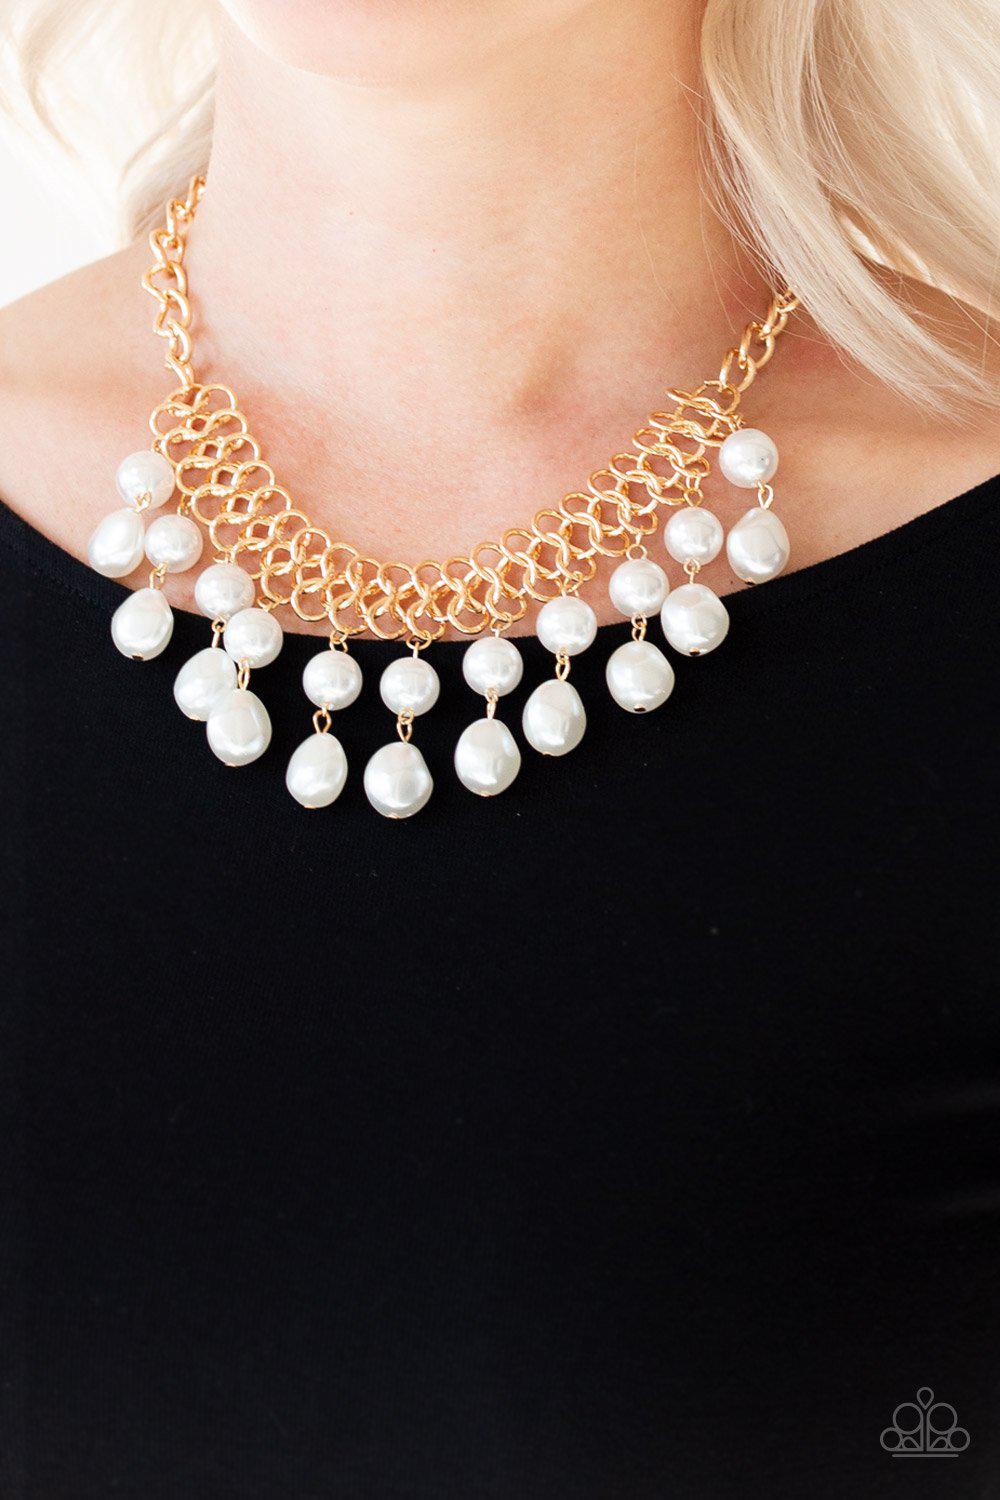 5th Avenue Fleek Gold and White Pearl Necklace - Paparazzi Accessories-CarasShop.com - $5 Jewelry by Cara Jewels